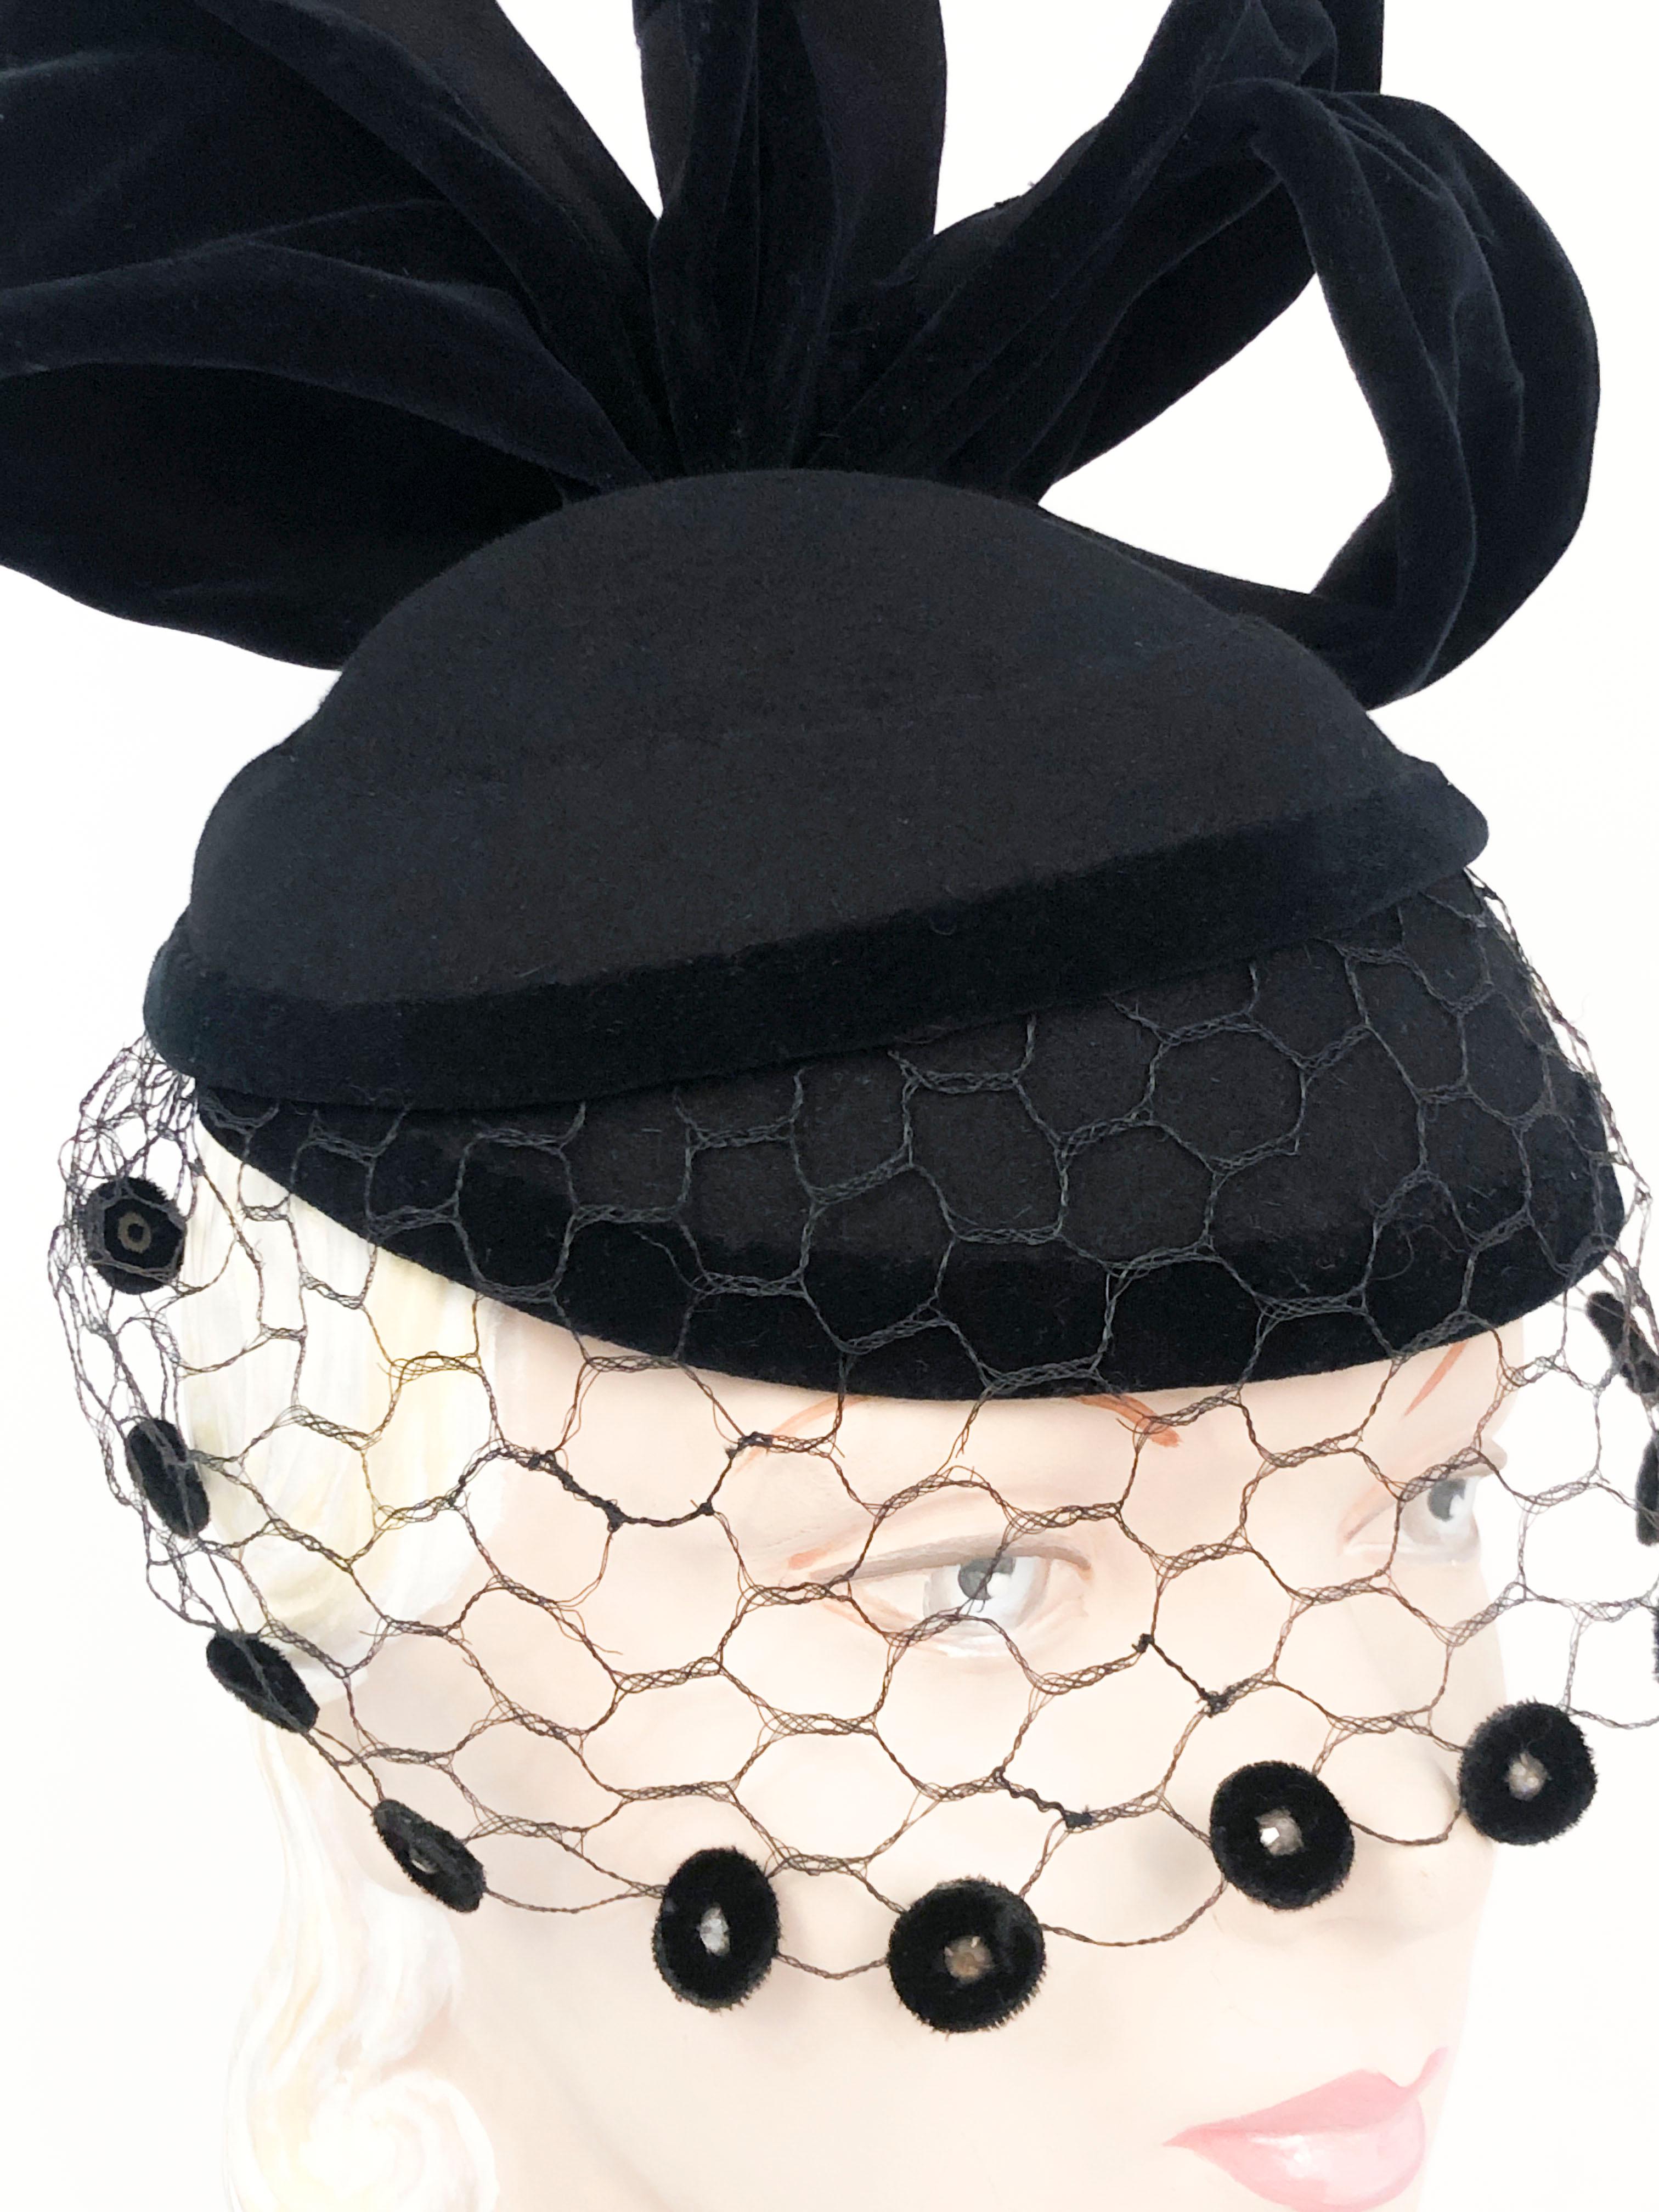 Women's 1930s Black Perch Hat with Structured Accents and Decorated Veil